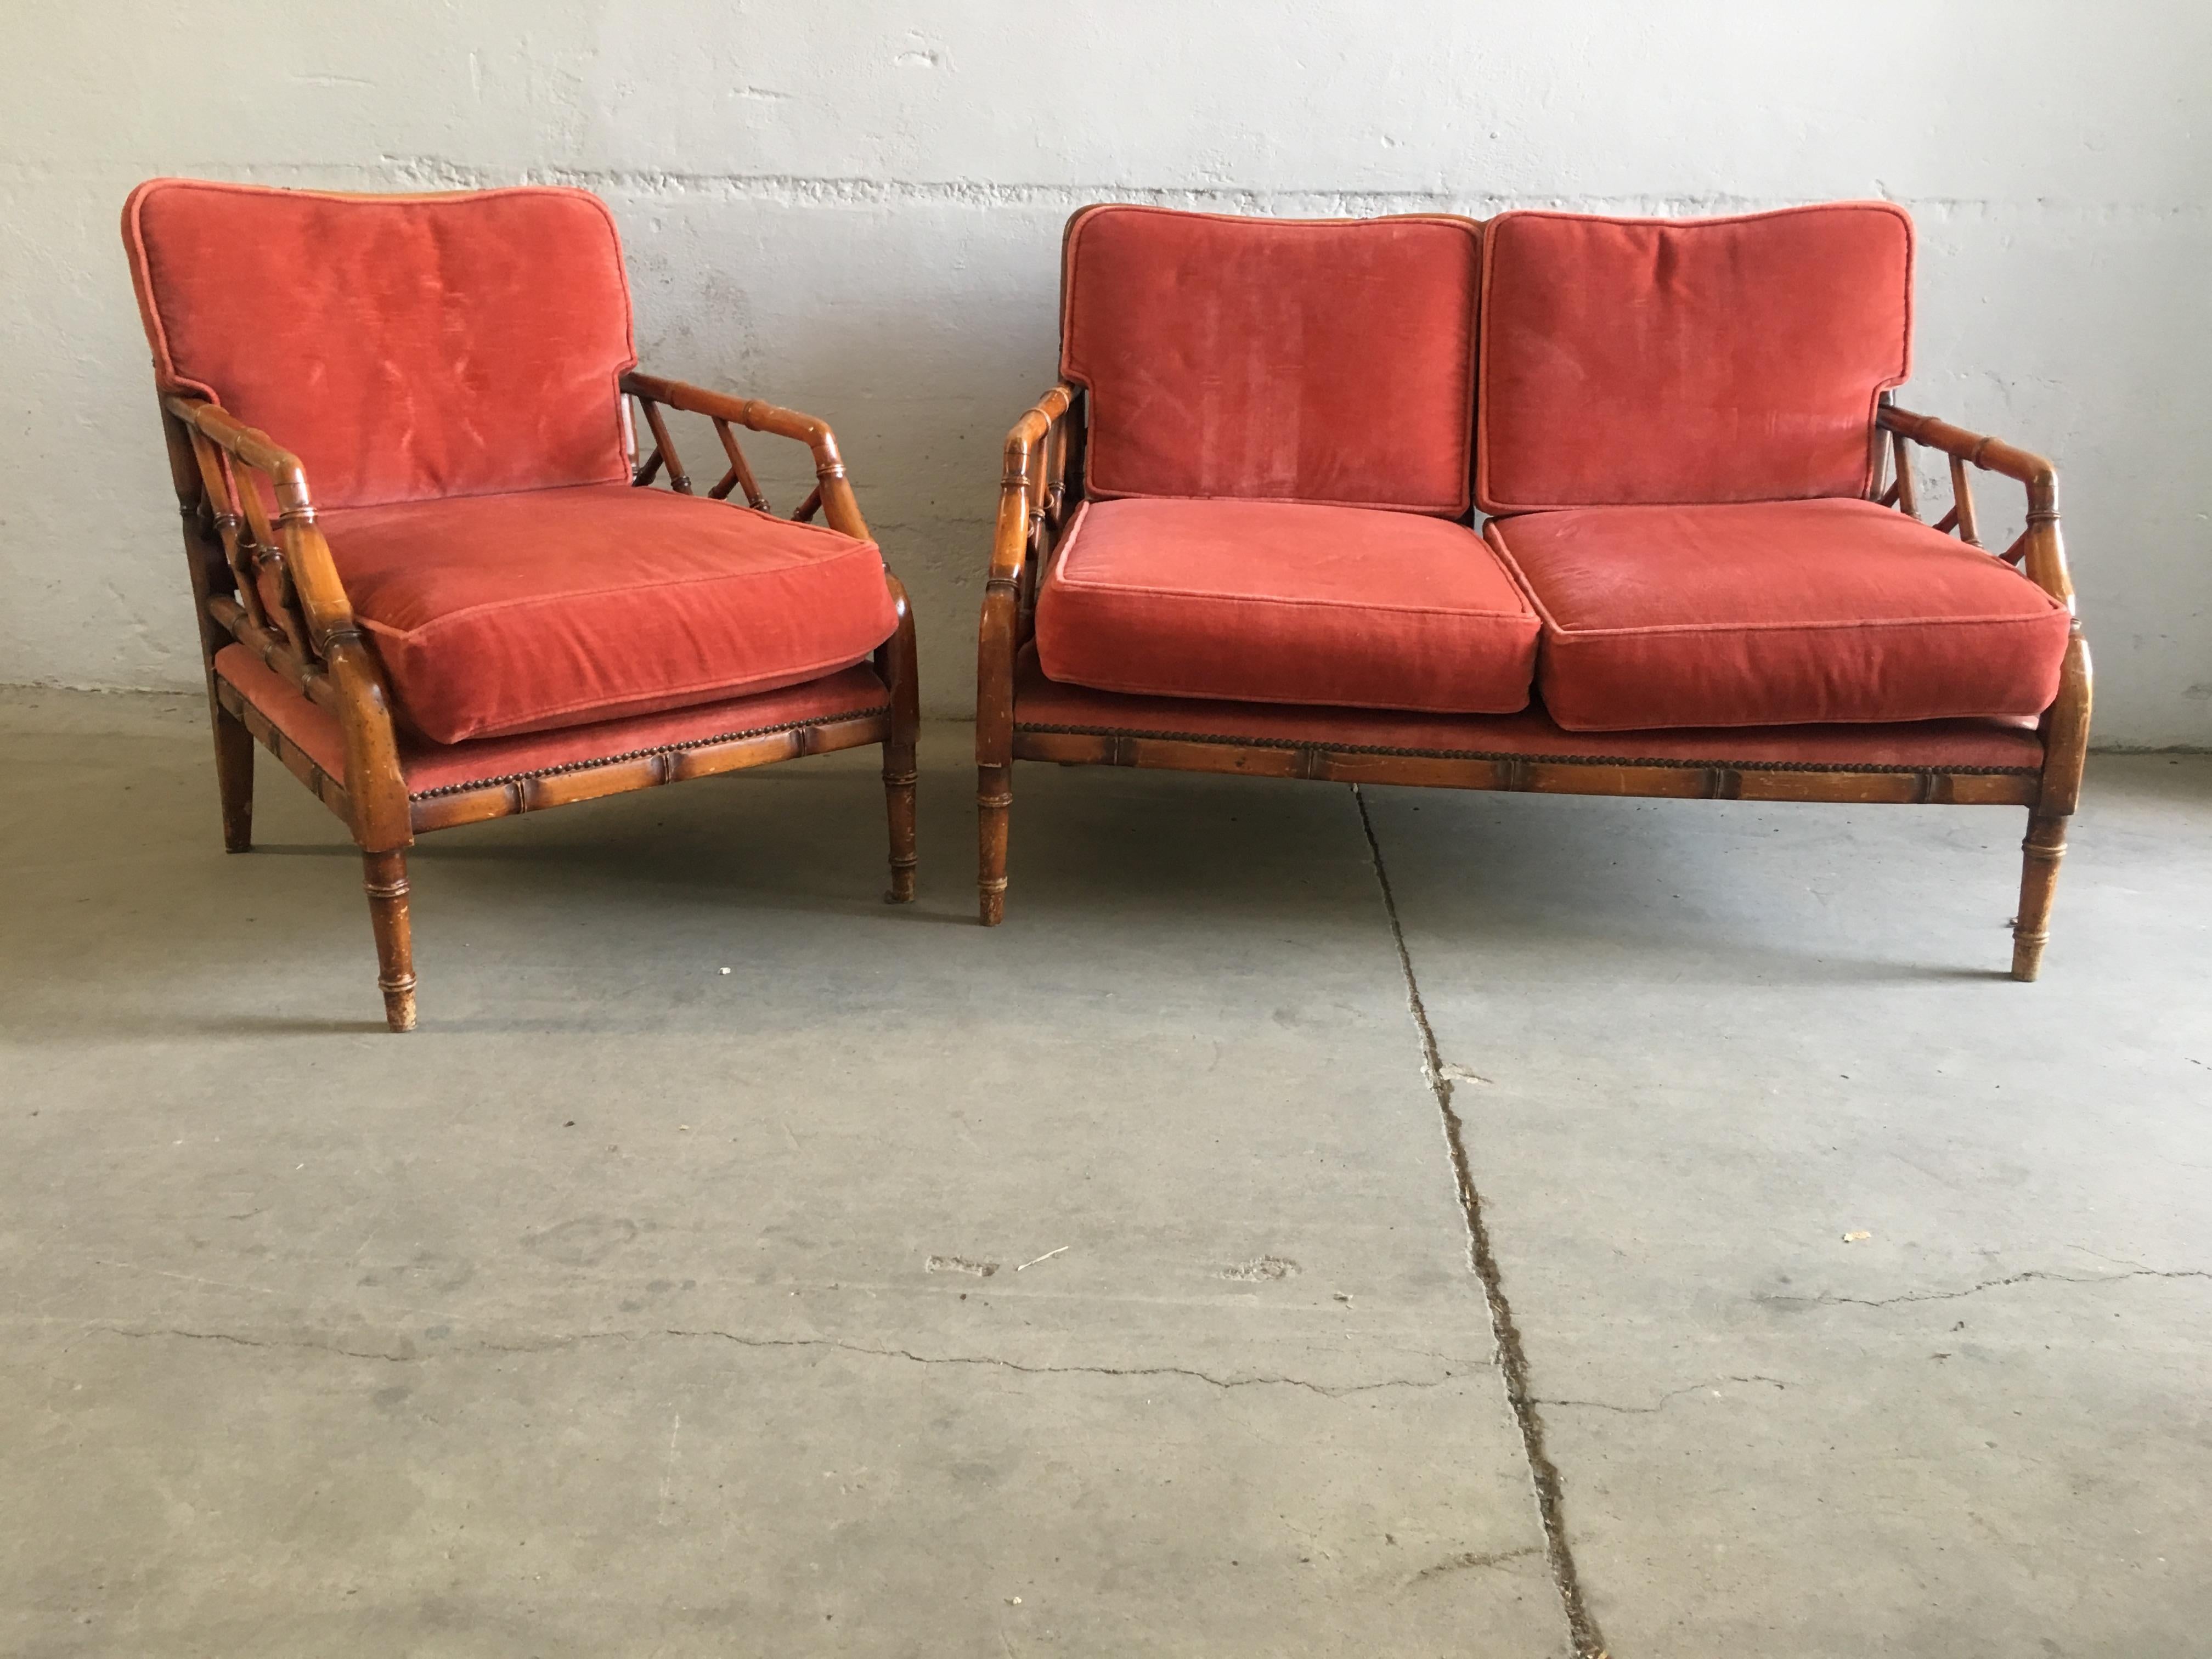 Mid-Century Modern Italian faux bamboo living room set with original upholstery. 1960s
The set consists of a two-seat sofa and one armchair
Measurements:
Sofa: length cm.115, width cm.65, height cm.77 (seat height cm.44)
Armchair: length cm.63,